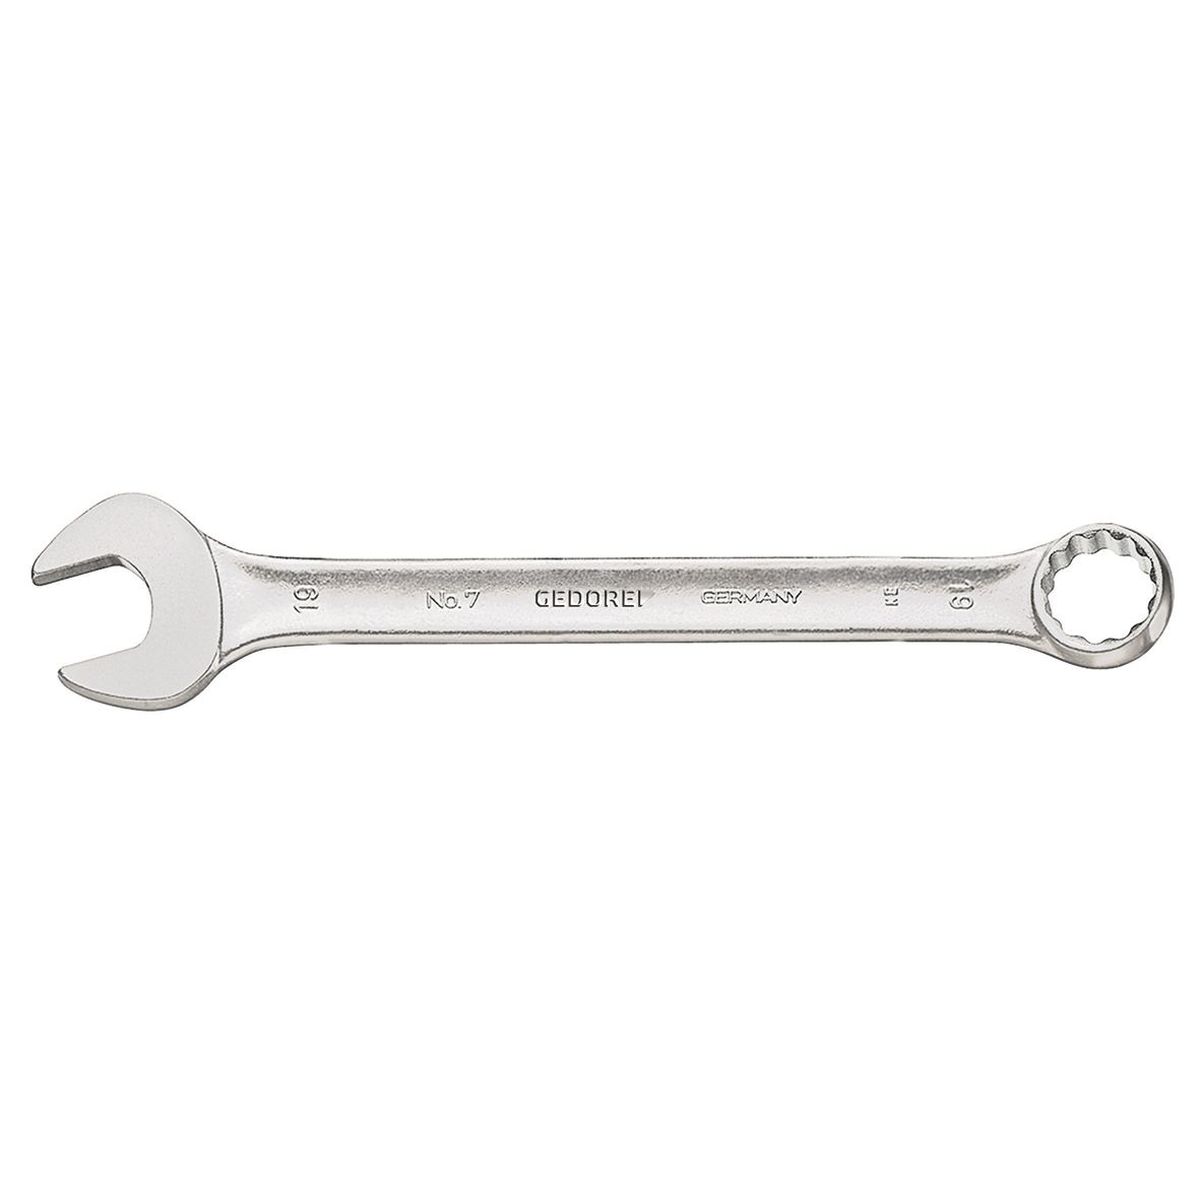 Combination spanner 12mm No.7 12 Gedore